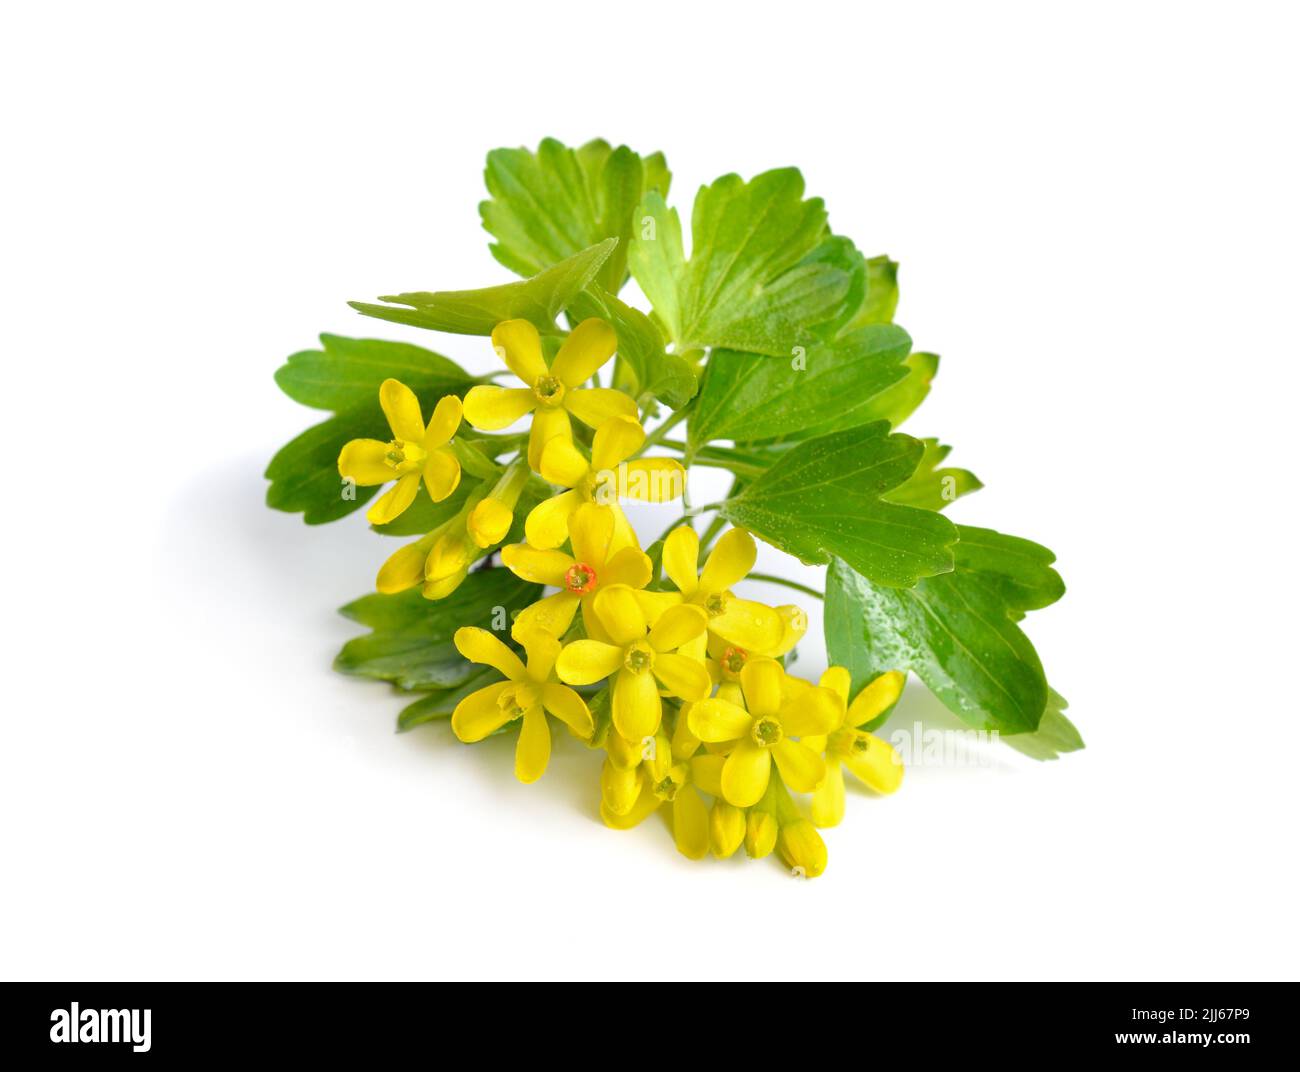 Ribes aureum, known by the common names golden currant, clove currant, pruterberry and buffalo currant, Ribes odoratum. Isolated. Stock Photo